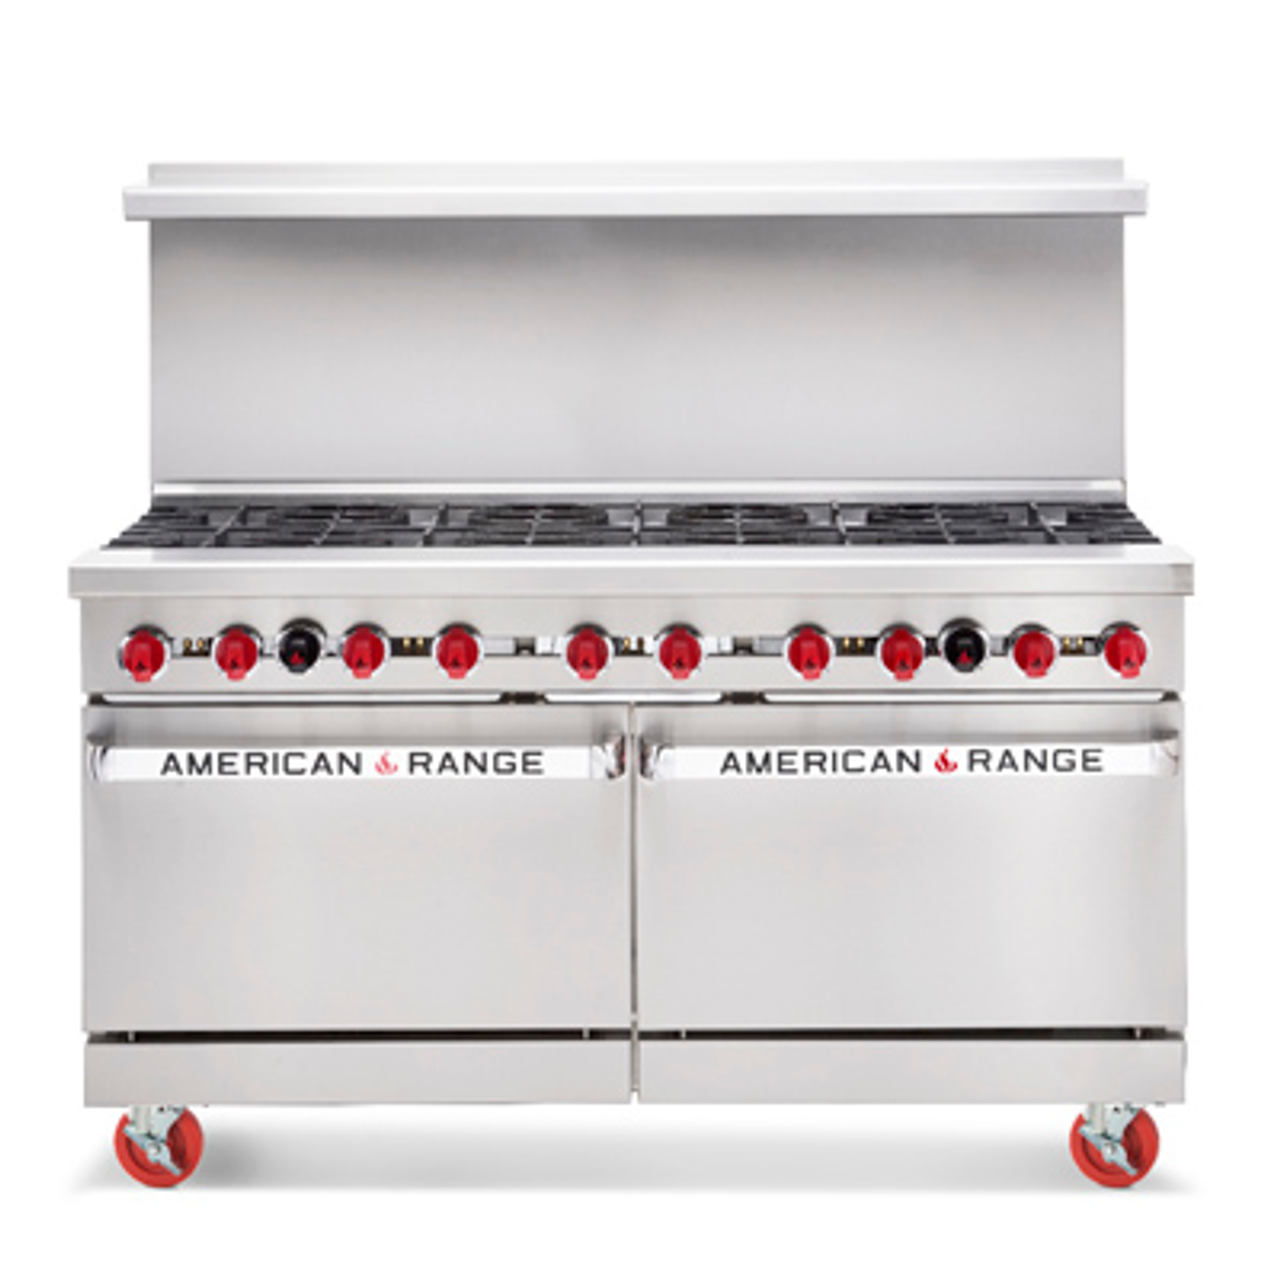 Heavy Duty Restaurant Range, gas, 60", (1) 24" griddle with 5/8" thick grill plate, manual controls, (6) 32,000 BTU open burners, (2) 26-1/2" ovens with one rack each, stainless steel front, sides & high shelf, 6" chrome plated legs, 89.0kW, 302,000 BTU, ETL-Sanitation, Made in USA